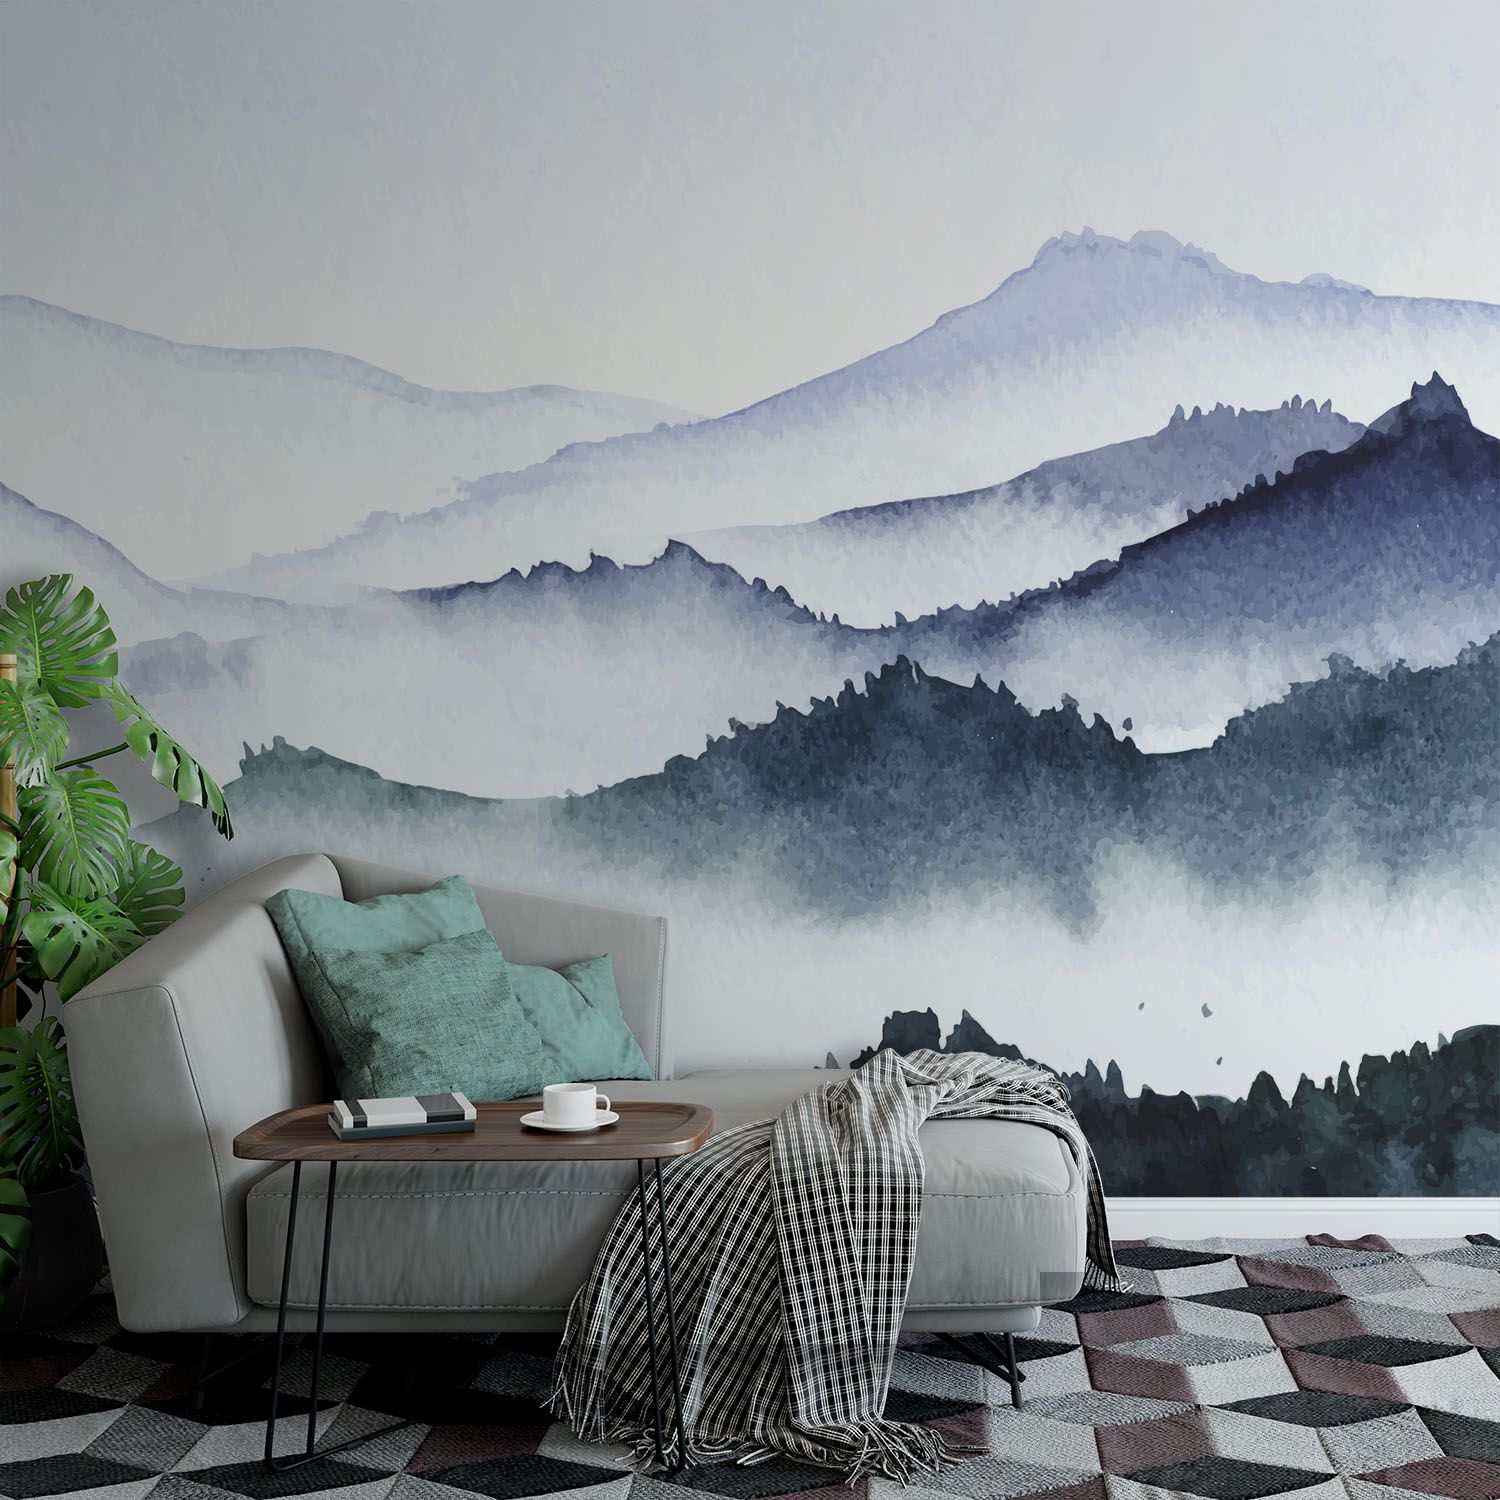 Fogs Between Mountains – Wall Mural, Pvc Free Wall Covering – Wall Murals,  Wall Paper Decor, Home Decor – Bestofbharat Throughout Current Mountains In The Fog Wall Art (View 11 of 20)